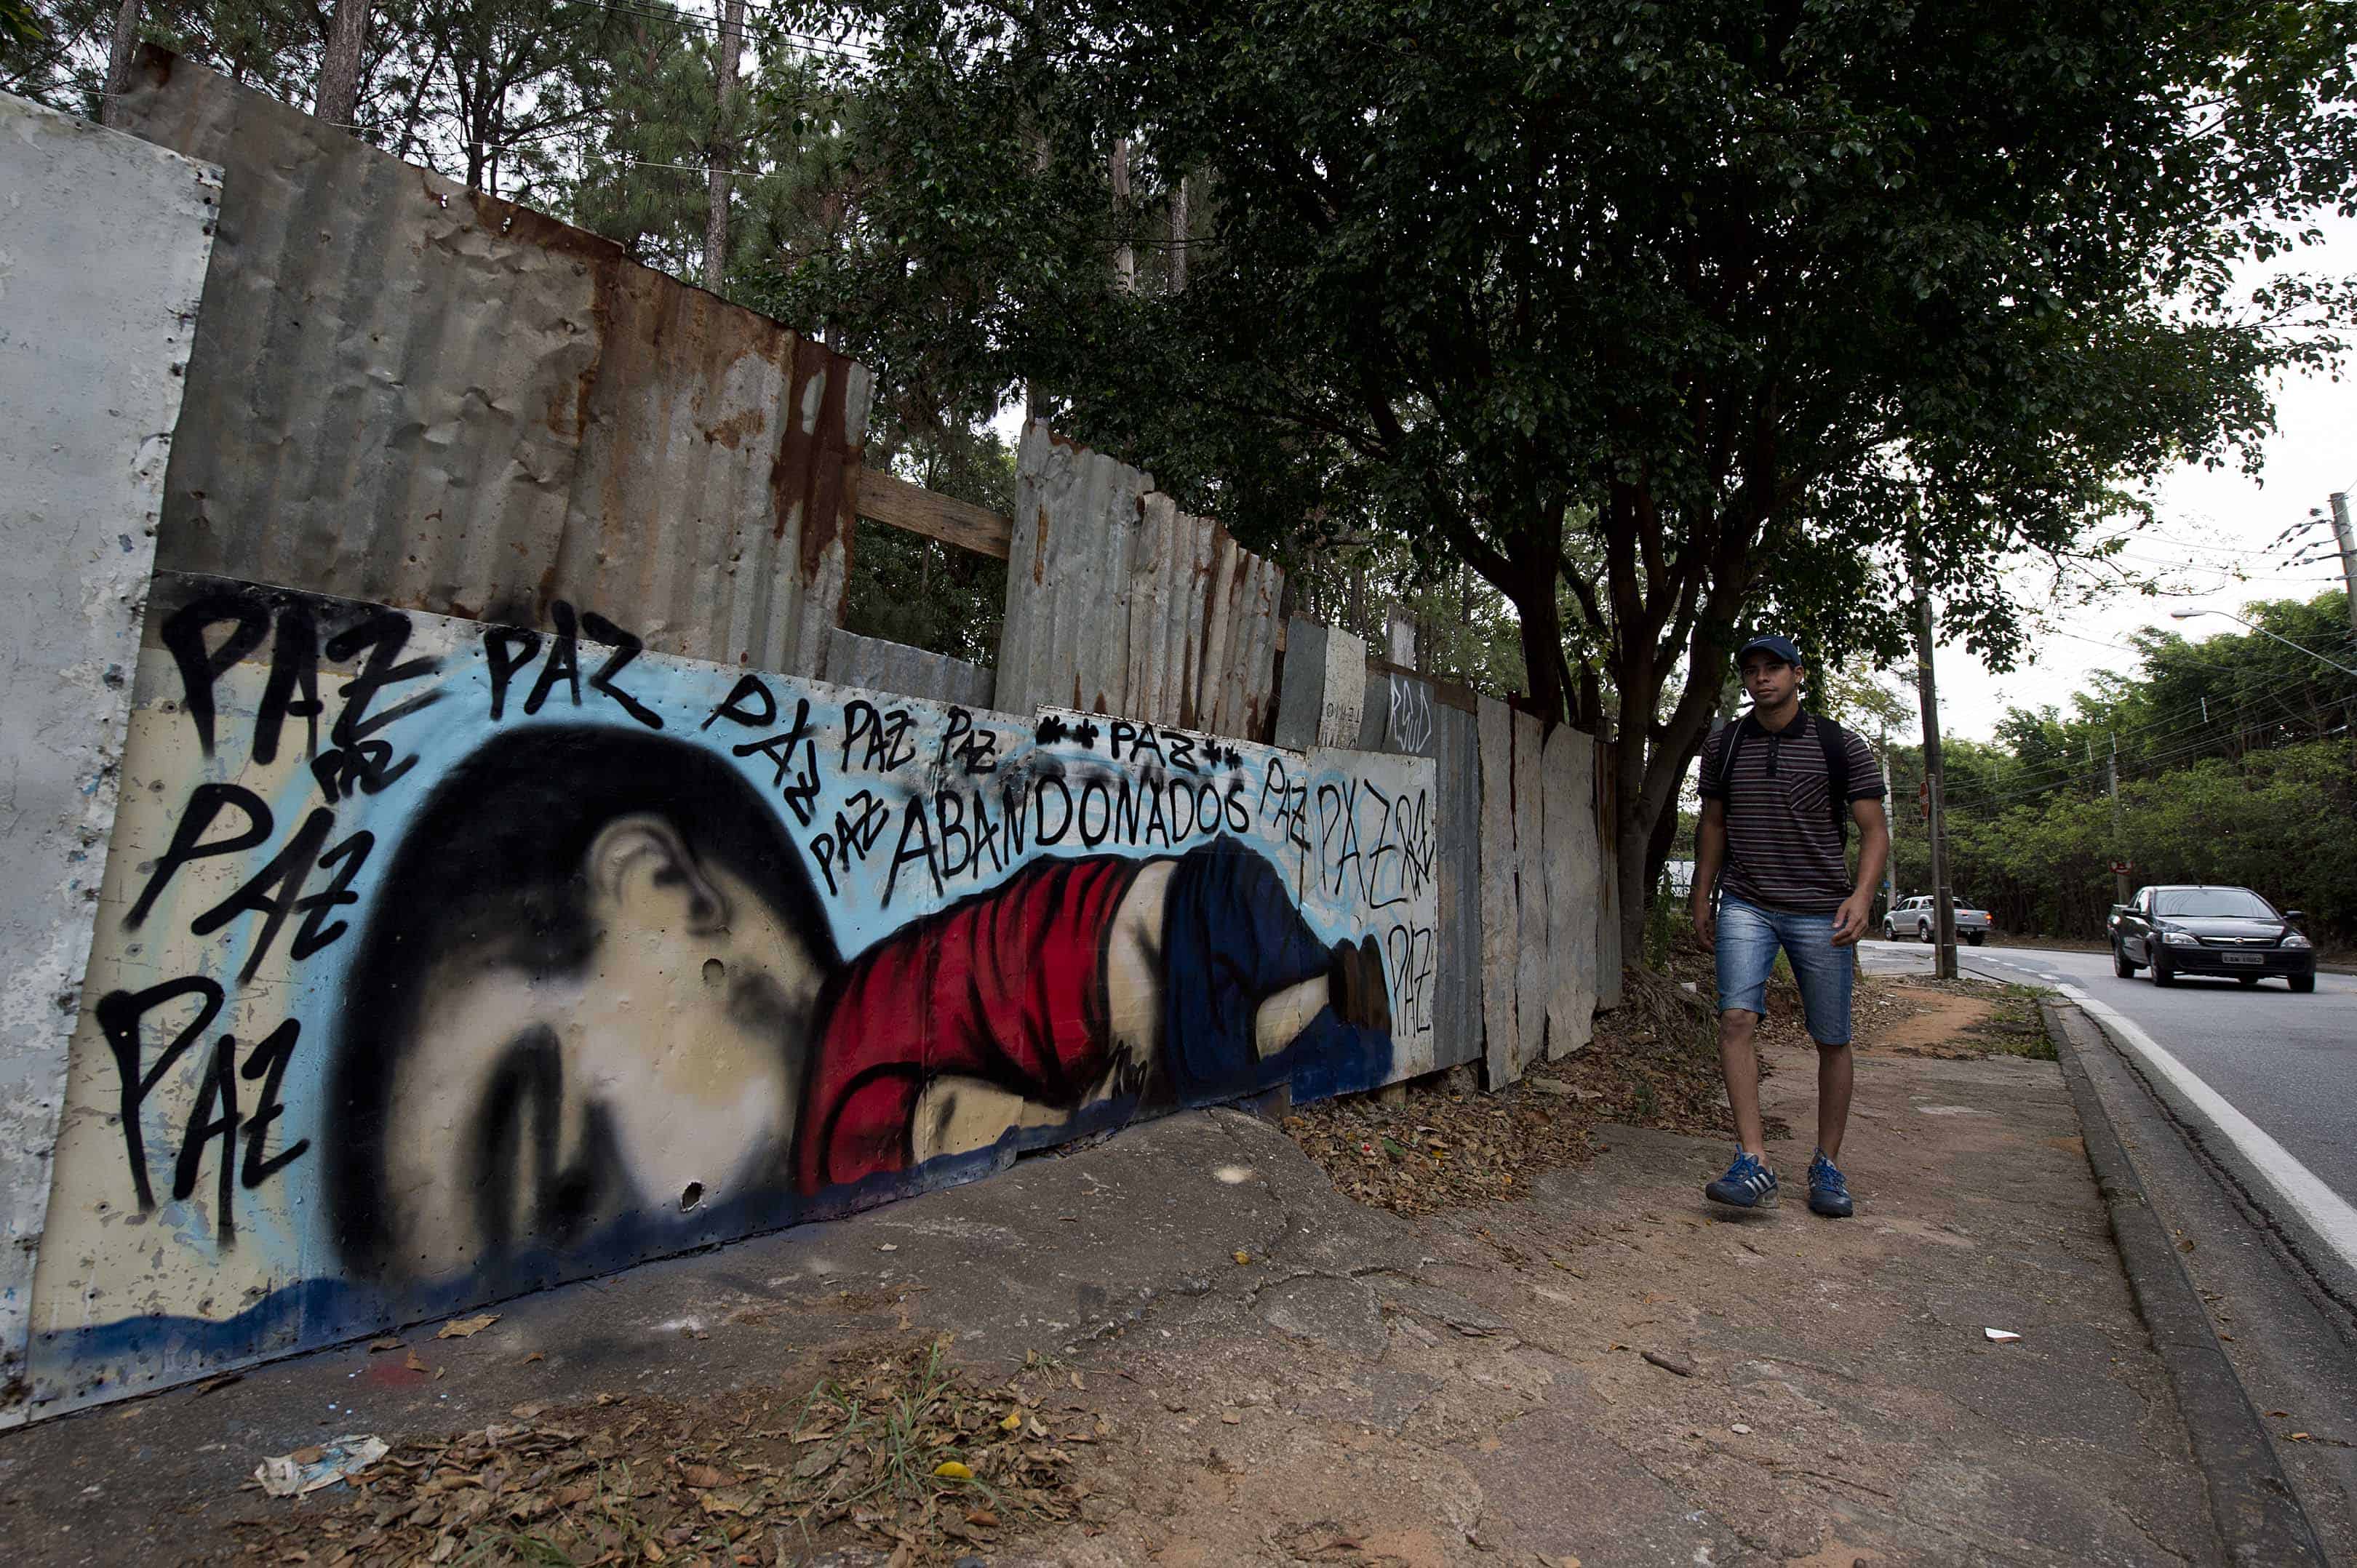 A graffiti depicting Aylan Kurdi, also known as Aylan Shenu, a Syrian 3-year-old boy whose drowning off a Turkish beach, is seen in Sorocaba, some 90 km from Sao Paulo, Brazil, on Sept. 6, 2015.